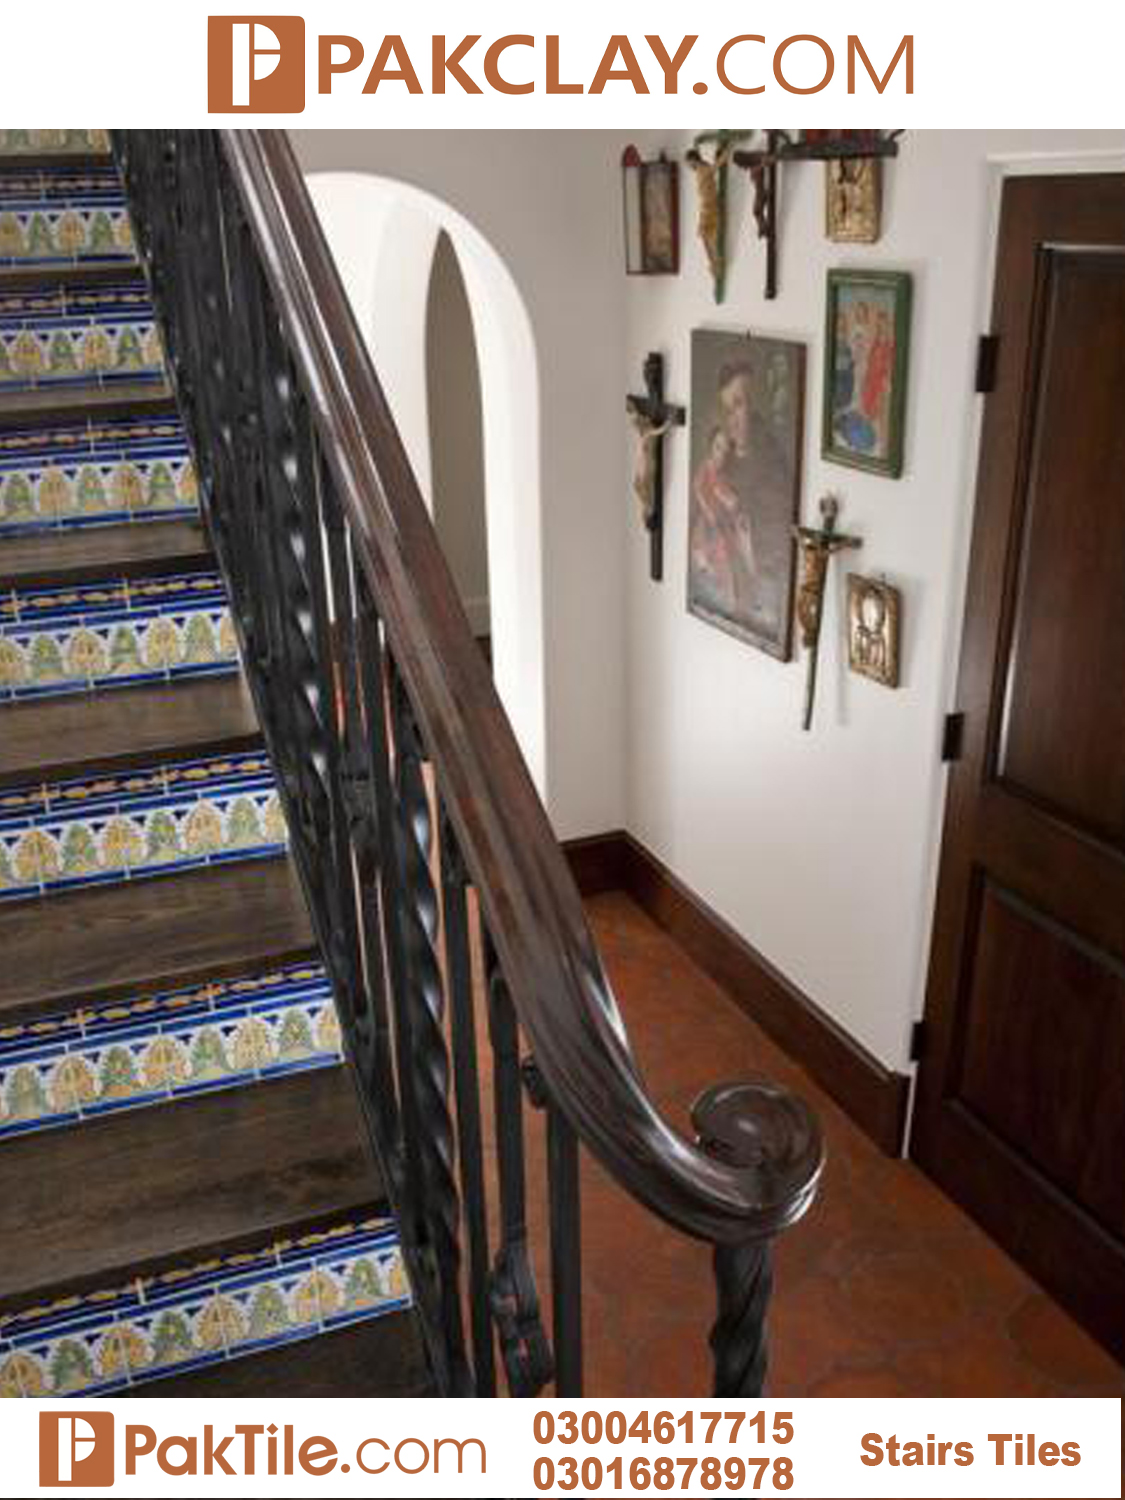 6 Pak Clay Indoor Staircase Tiles Design in Lahore